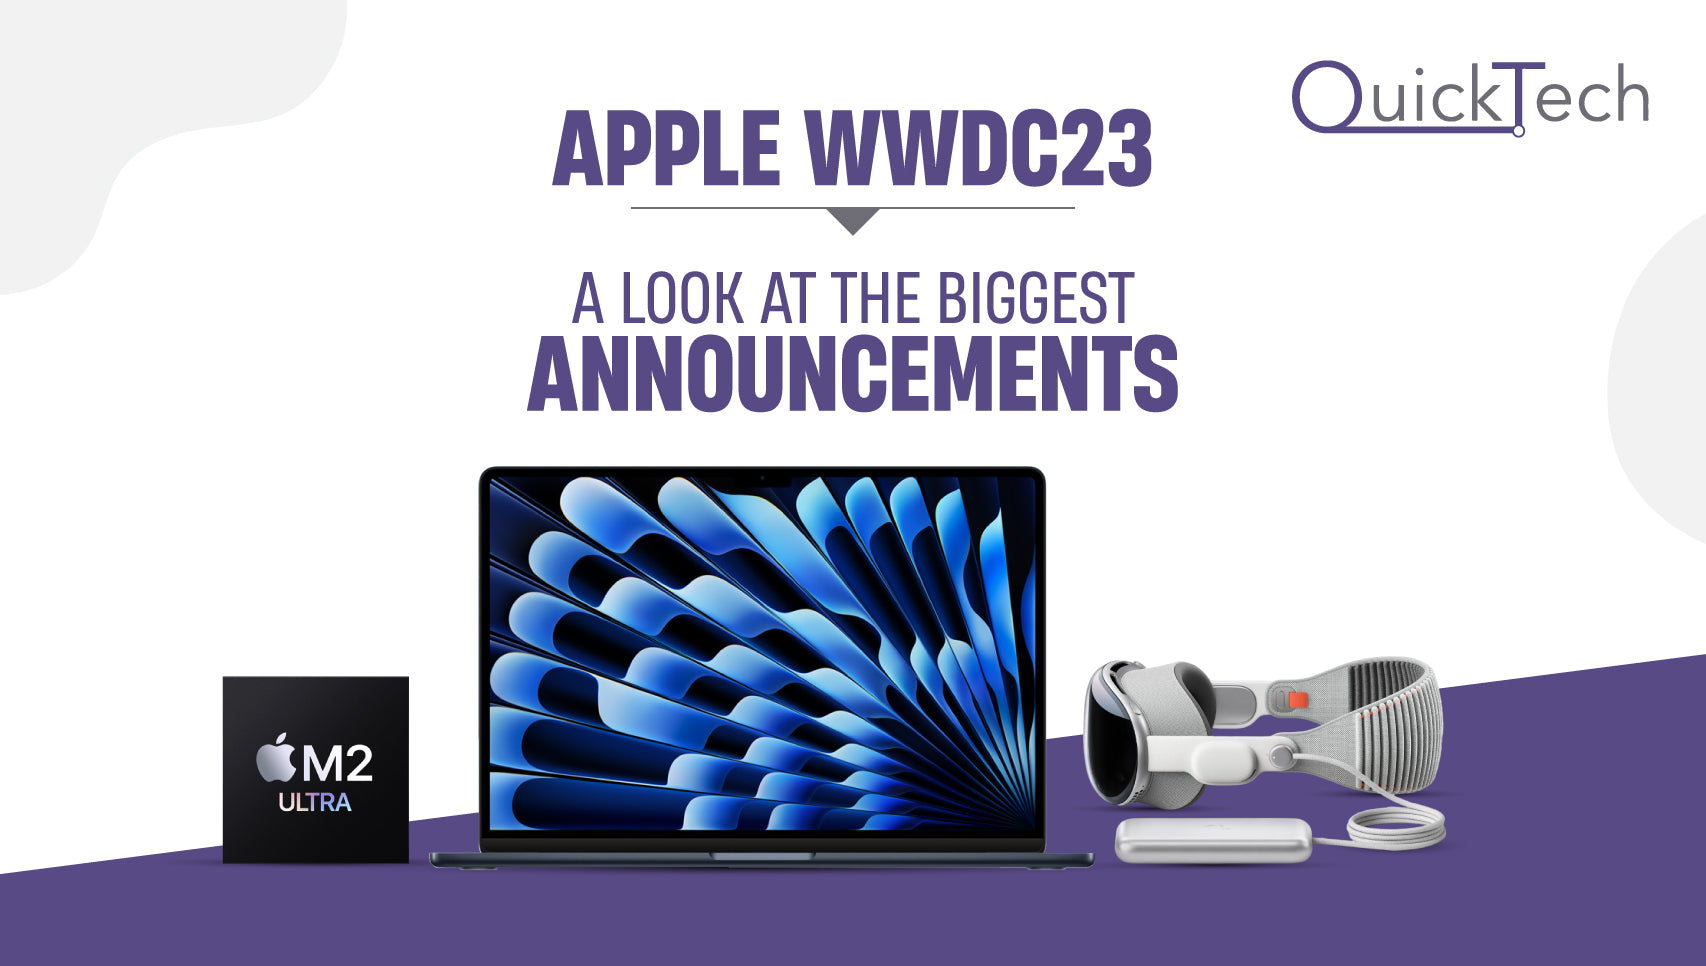 Apple WWDC23 A Look at the Biggest Announcements QuickTech